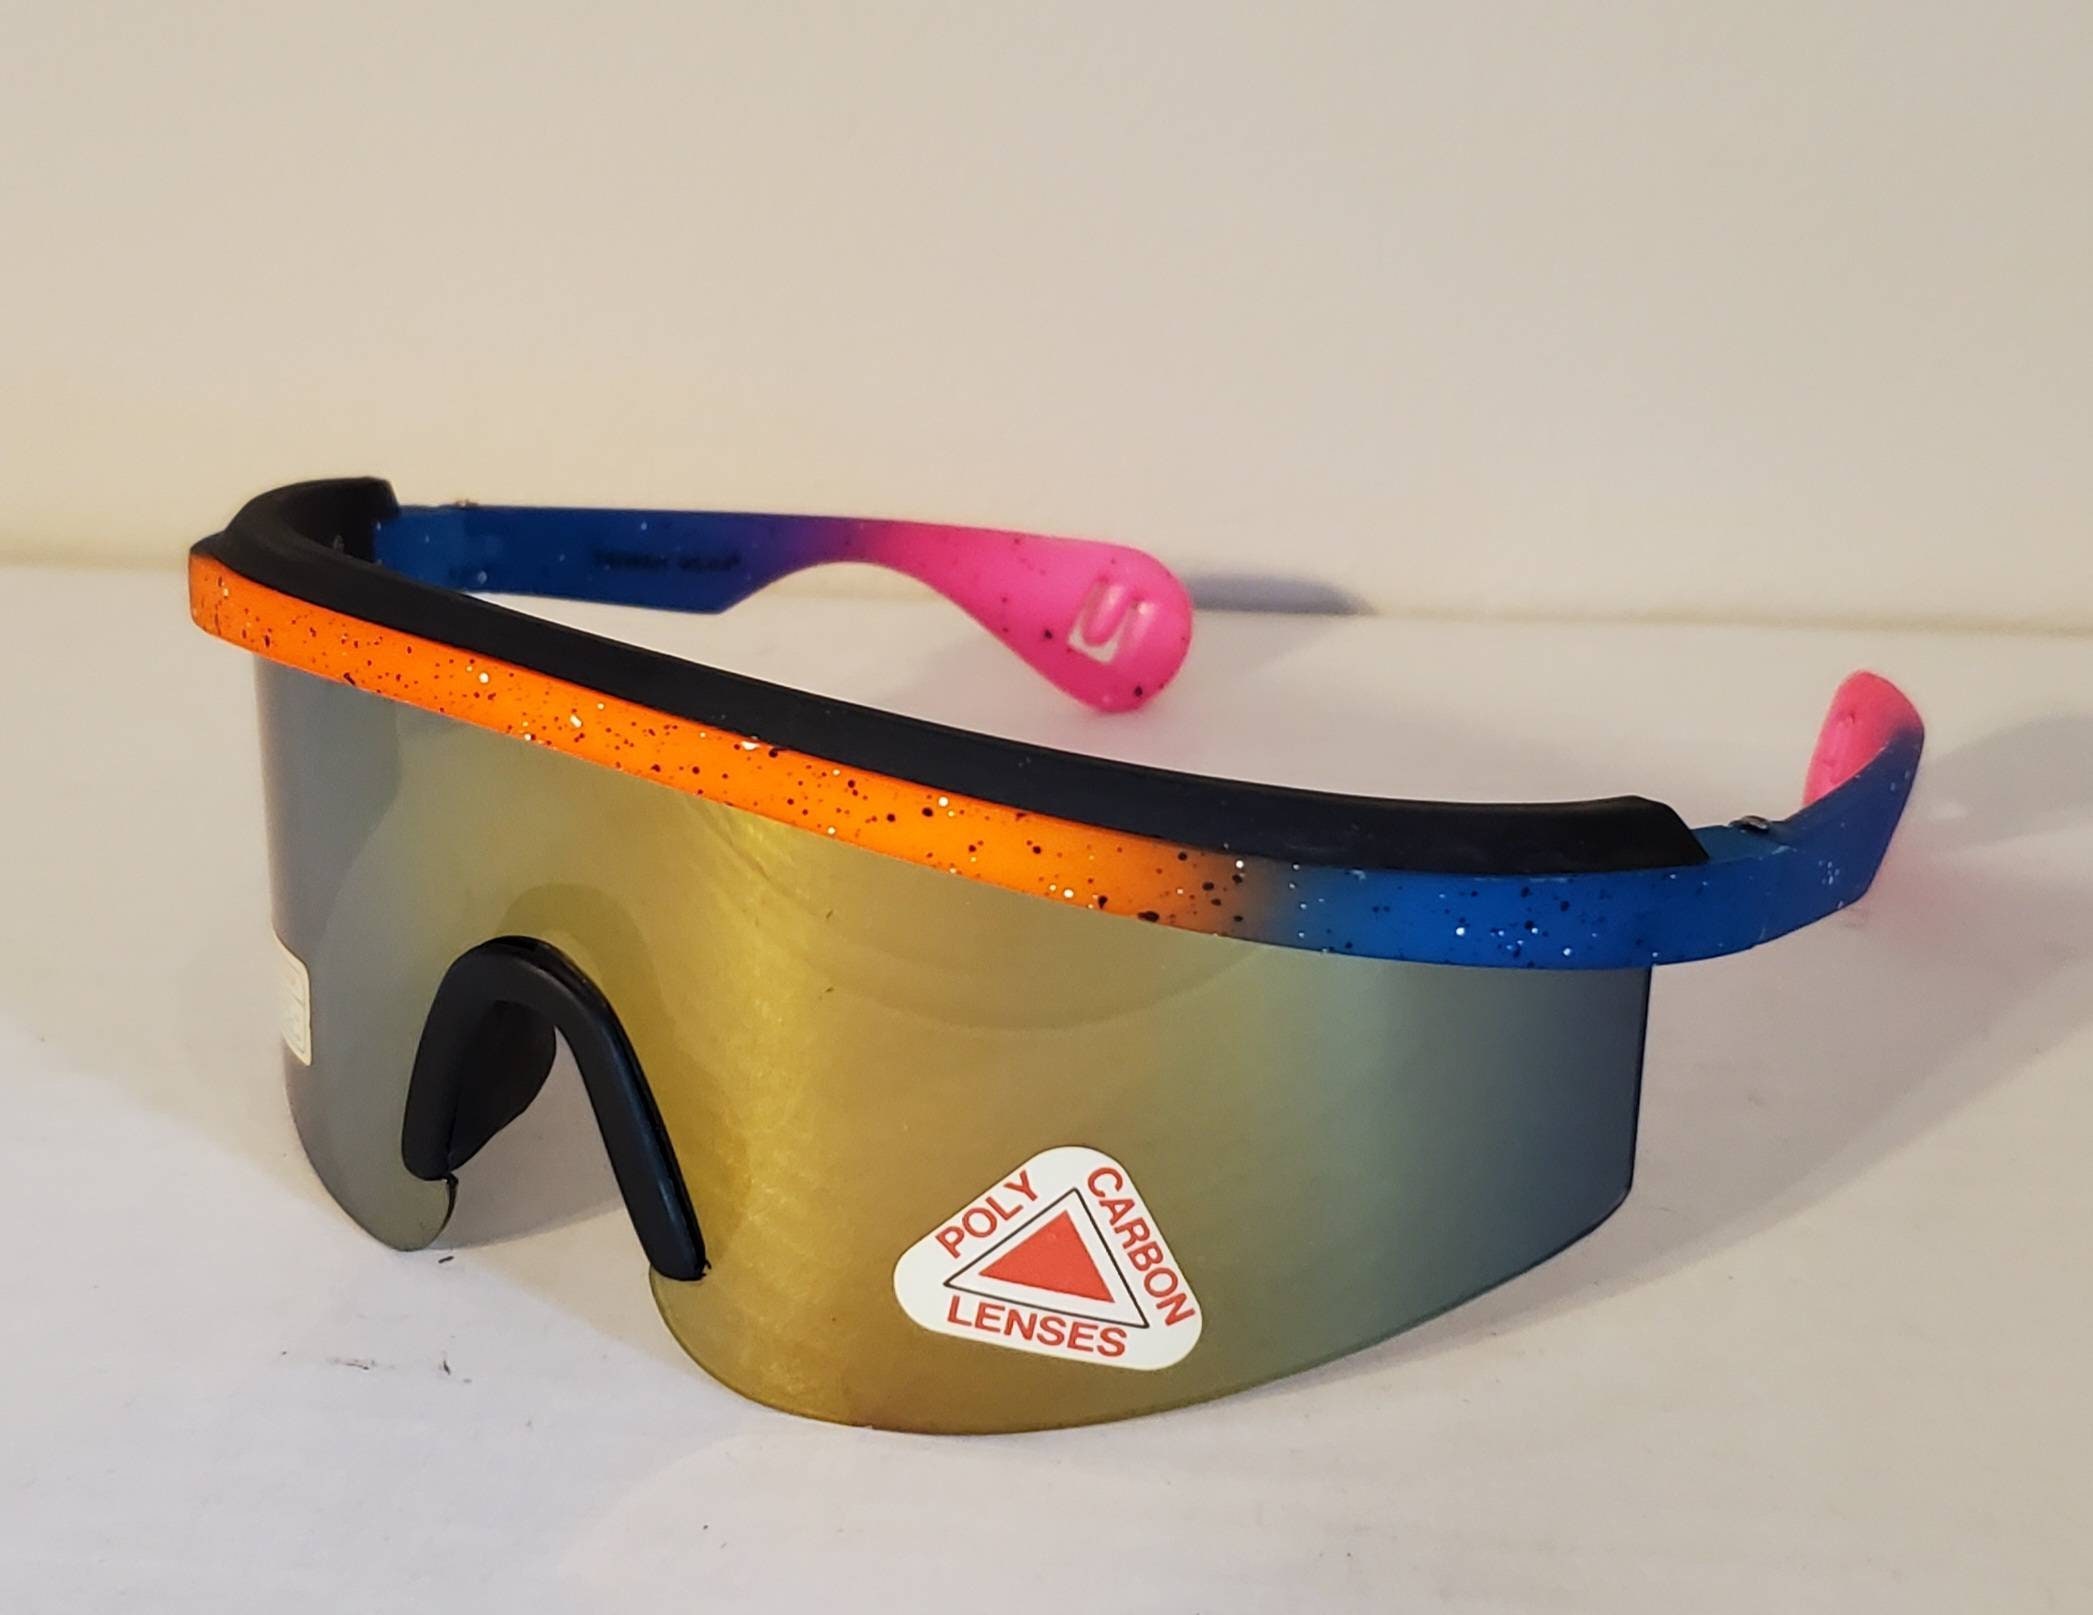 Vintage Sports Sunglasses // Blade Big Shield From 80s 90s // Multicolor  Colorful Sports Shades // Festival Rave Party // Retro VTG NOS - Etsy